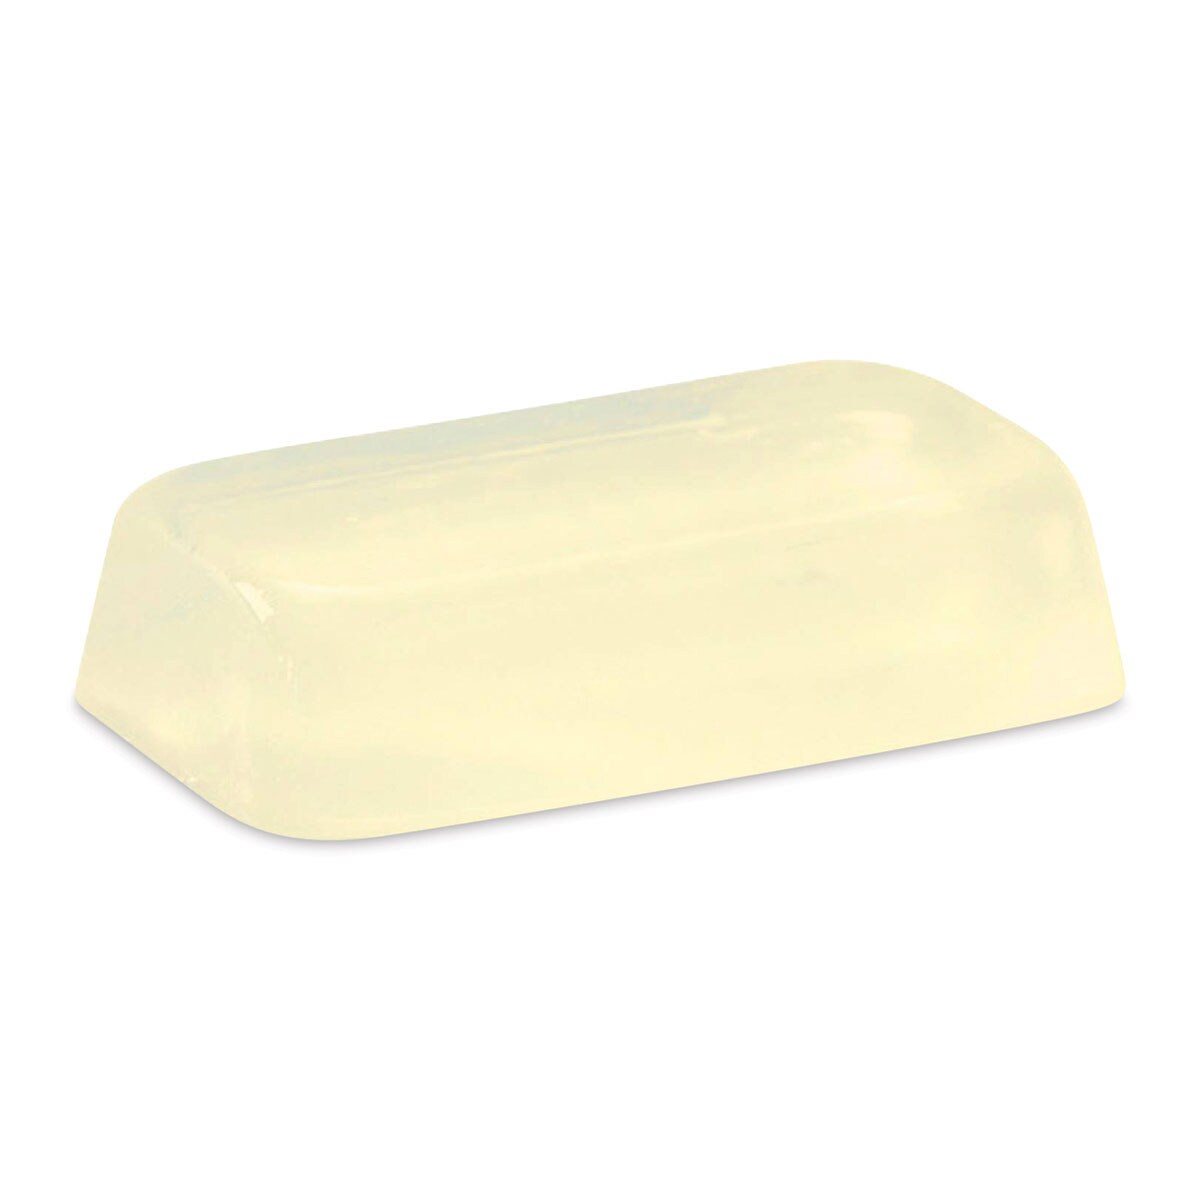 We R Memory Keepers Suds Soap Base - Honey, 2 lb